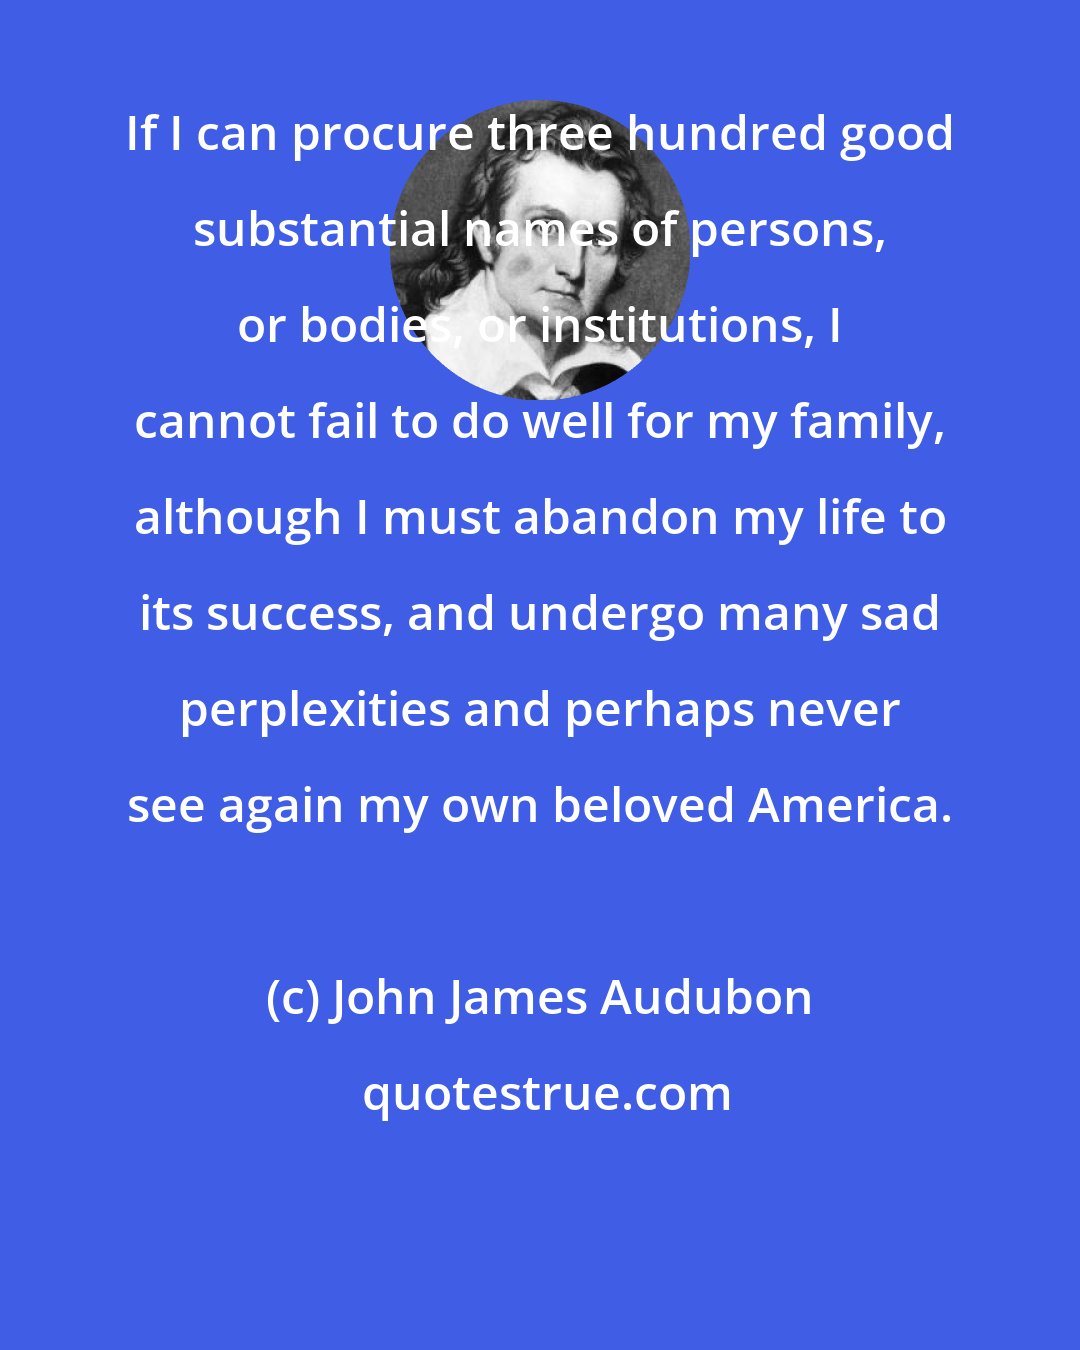 John James Audubon: If I can procure three hundred good substantial names of persons, or bodies, or institutions, I cannot fail to do well for my family, although I must abandon my life to its success, and undergo many sad perplexities and perhaps never see again my own beloved America.